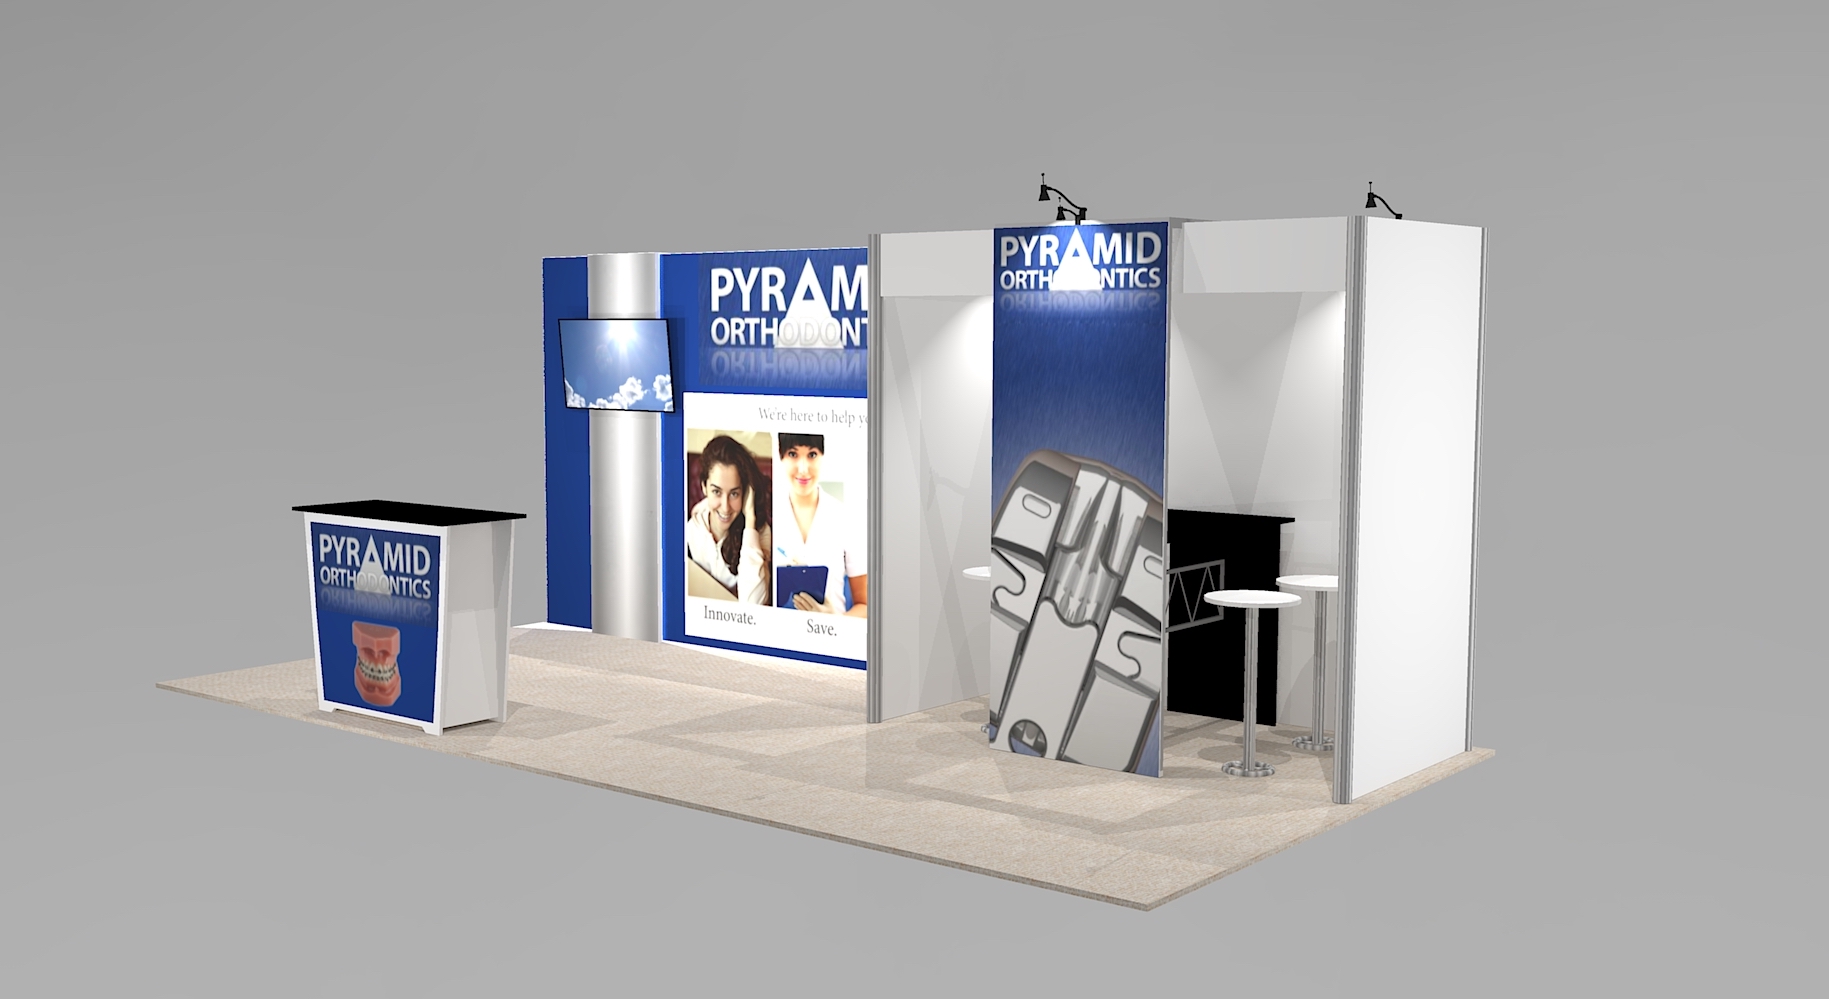 PO1020-BL-20 ft Trade Show Exhibit Rental with meeting space